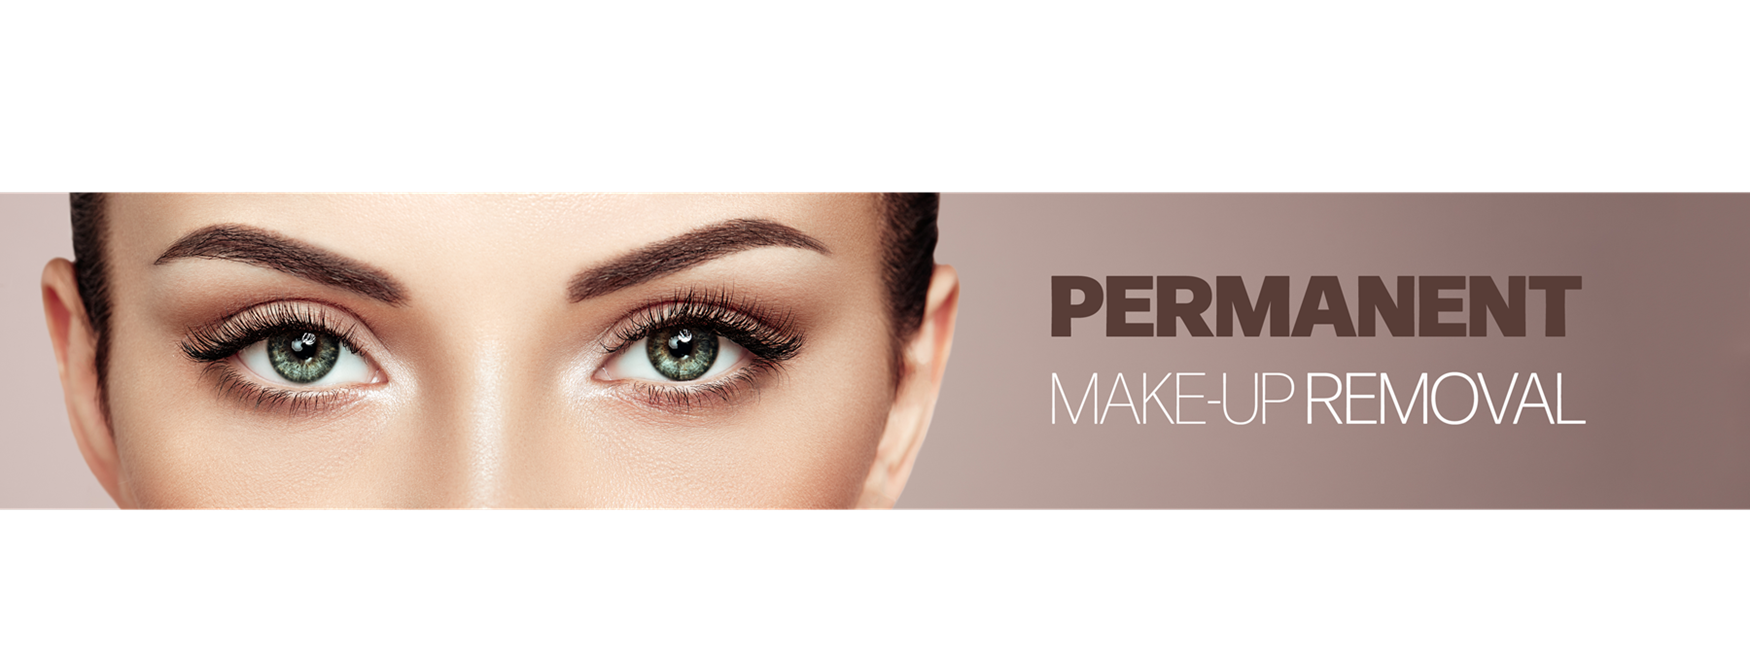 Permanent-make-up-removal-